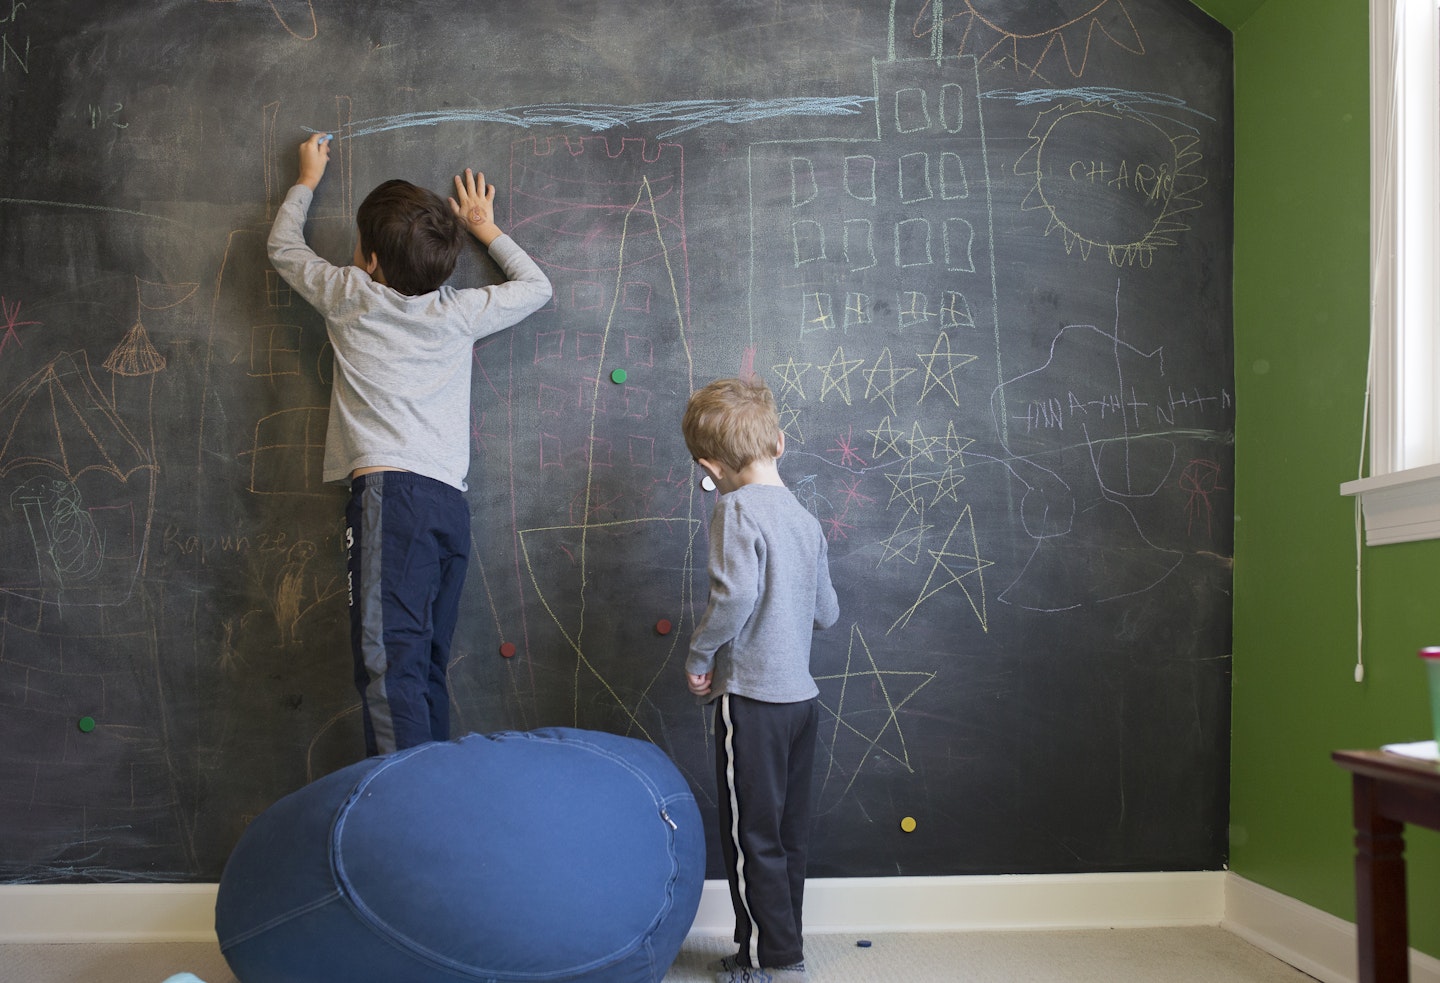 Not Just For Kids: Cool Chalkboard Walls